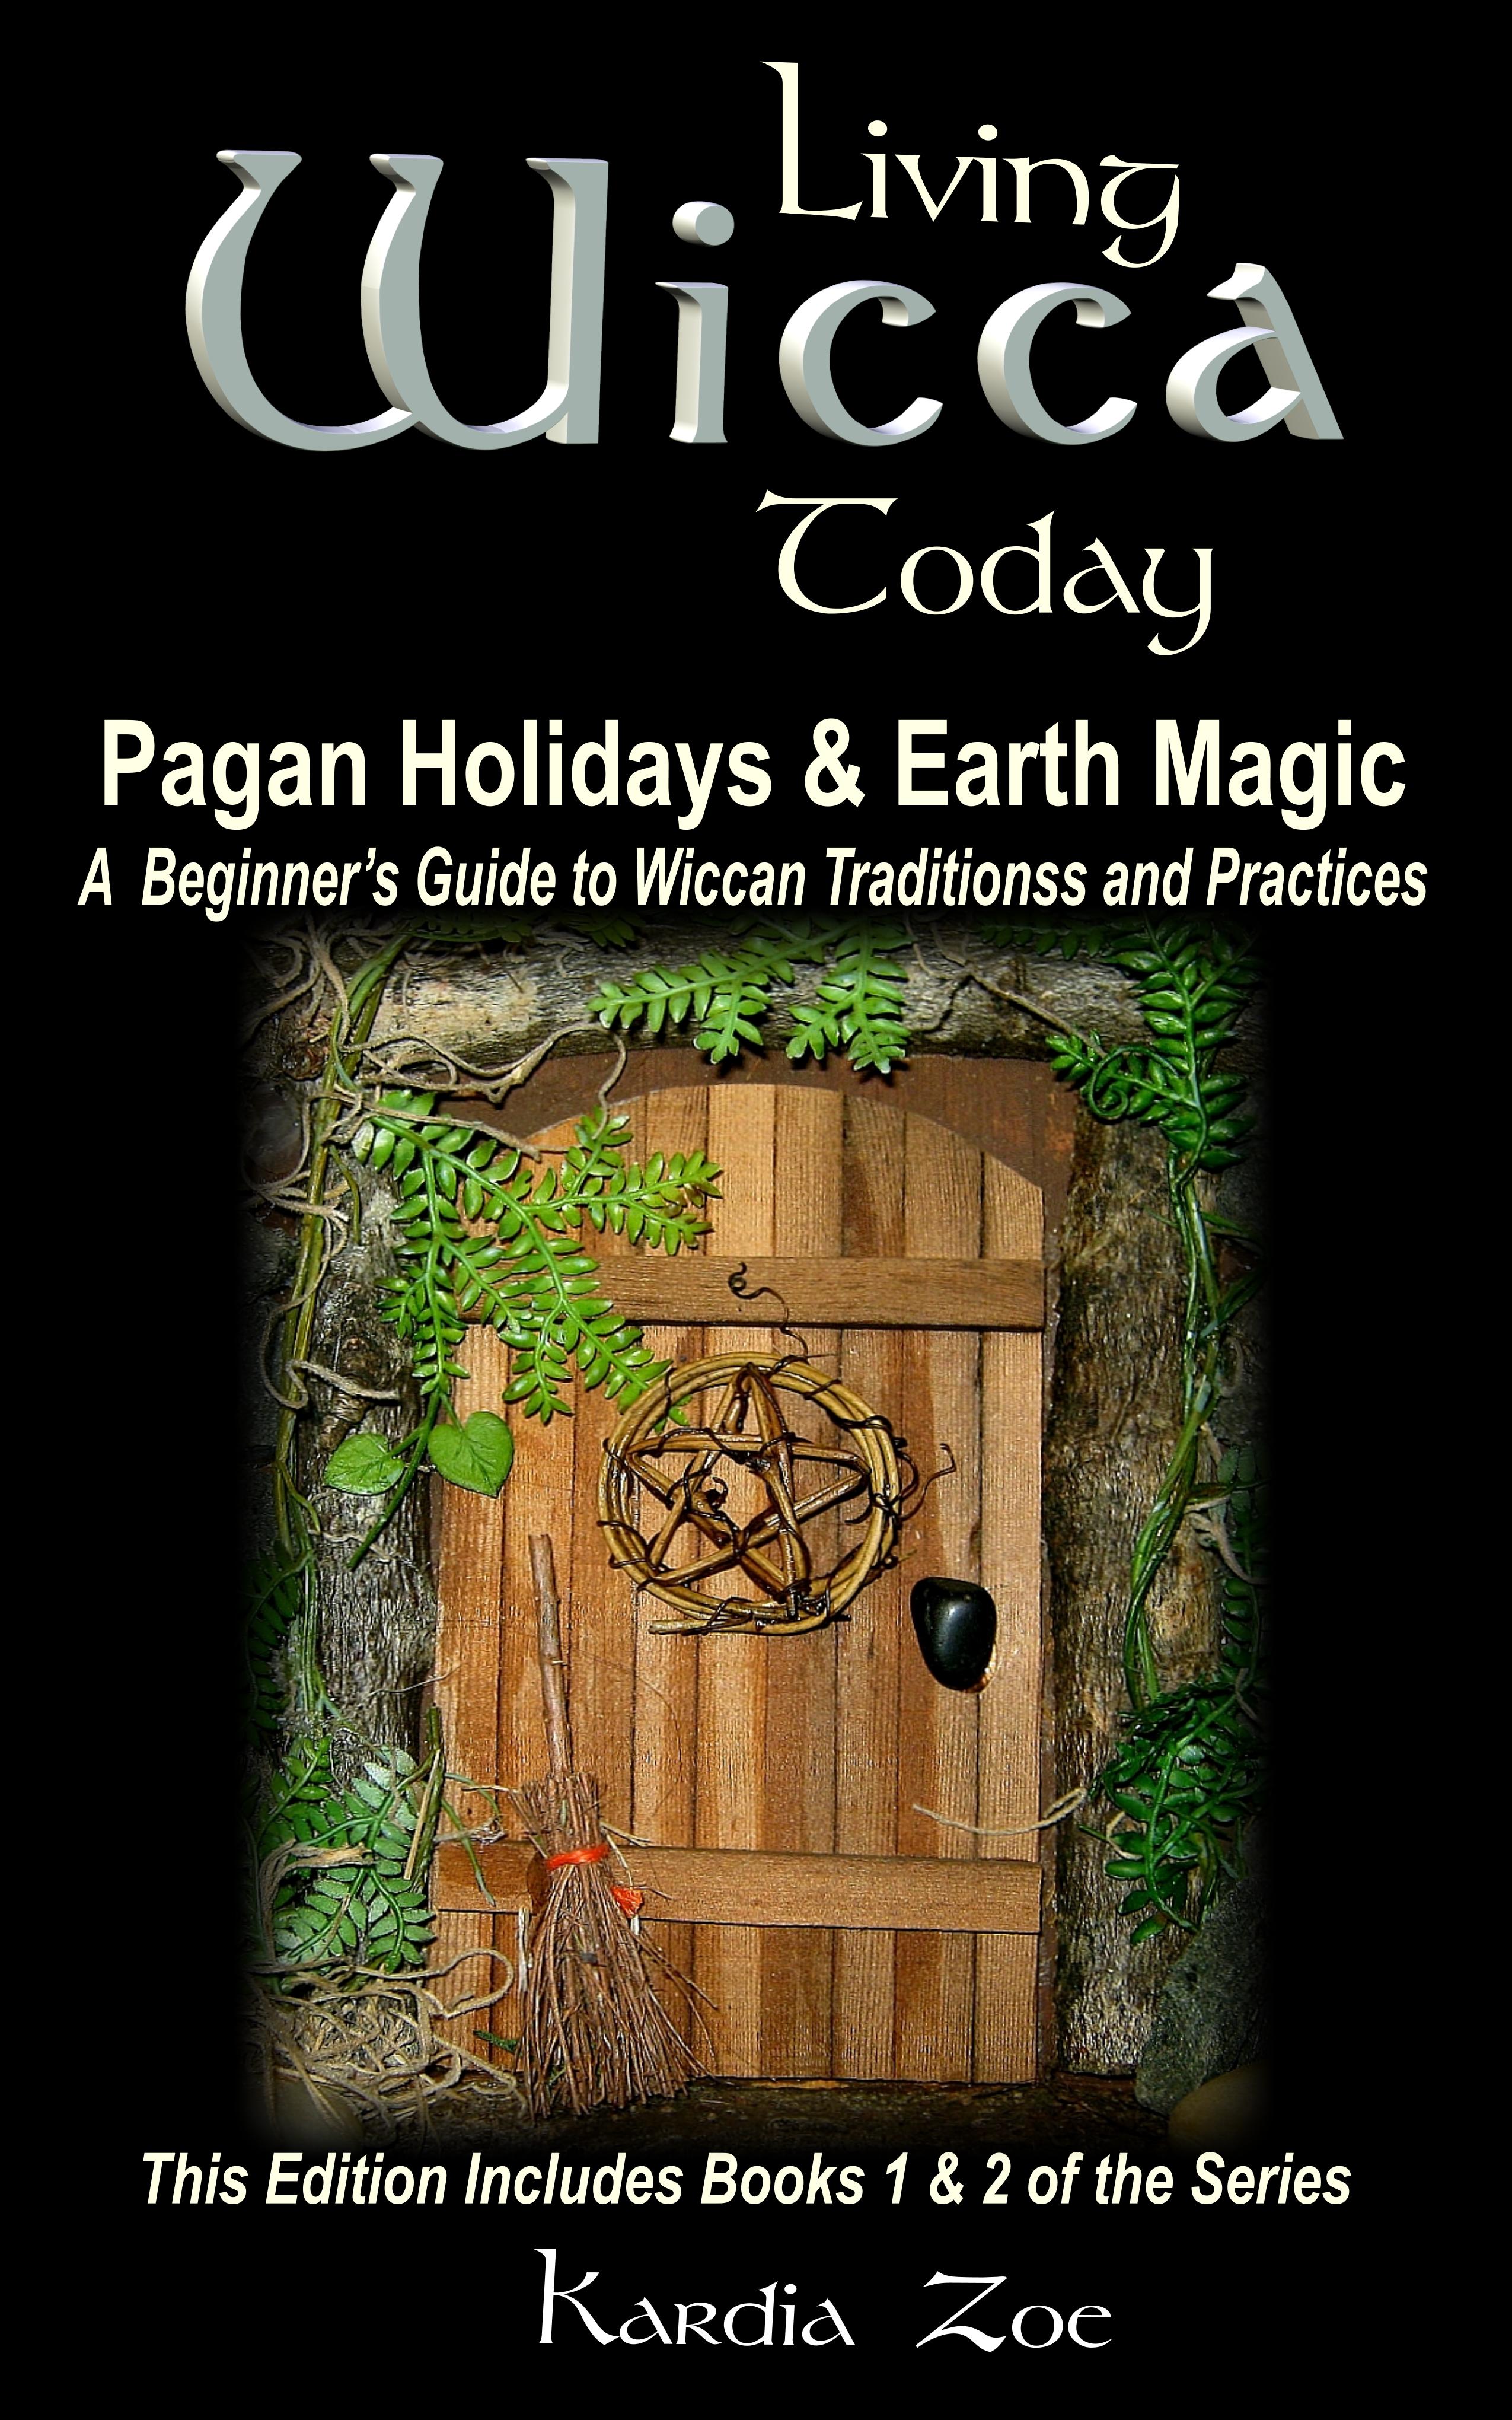 Living Wicca Today: Pagan Holidays & Earth Magic